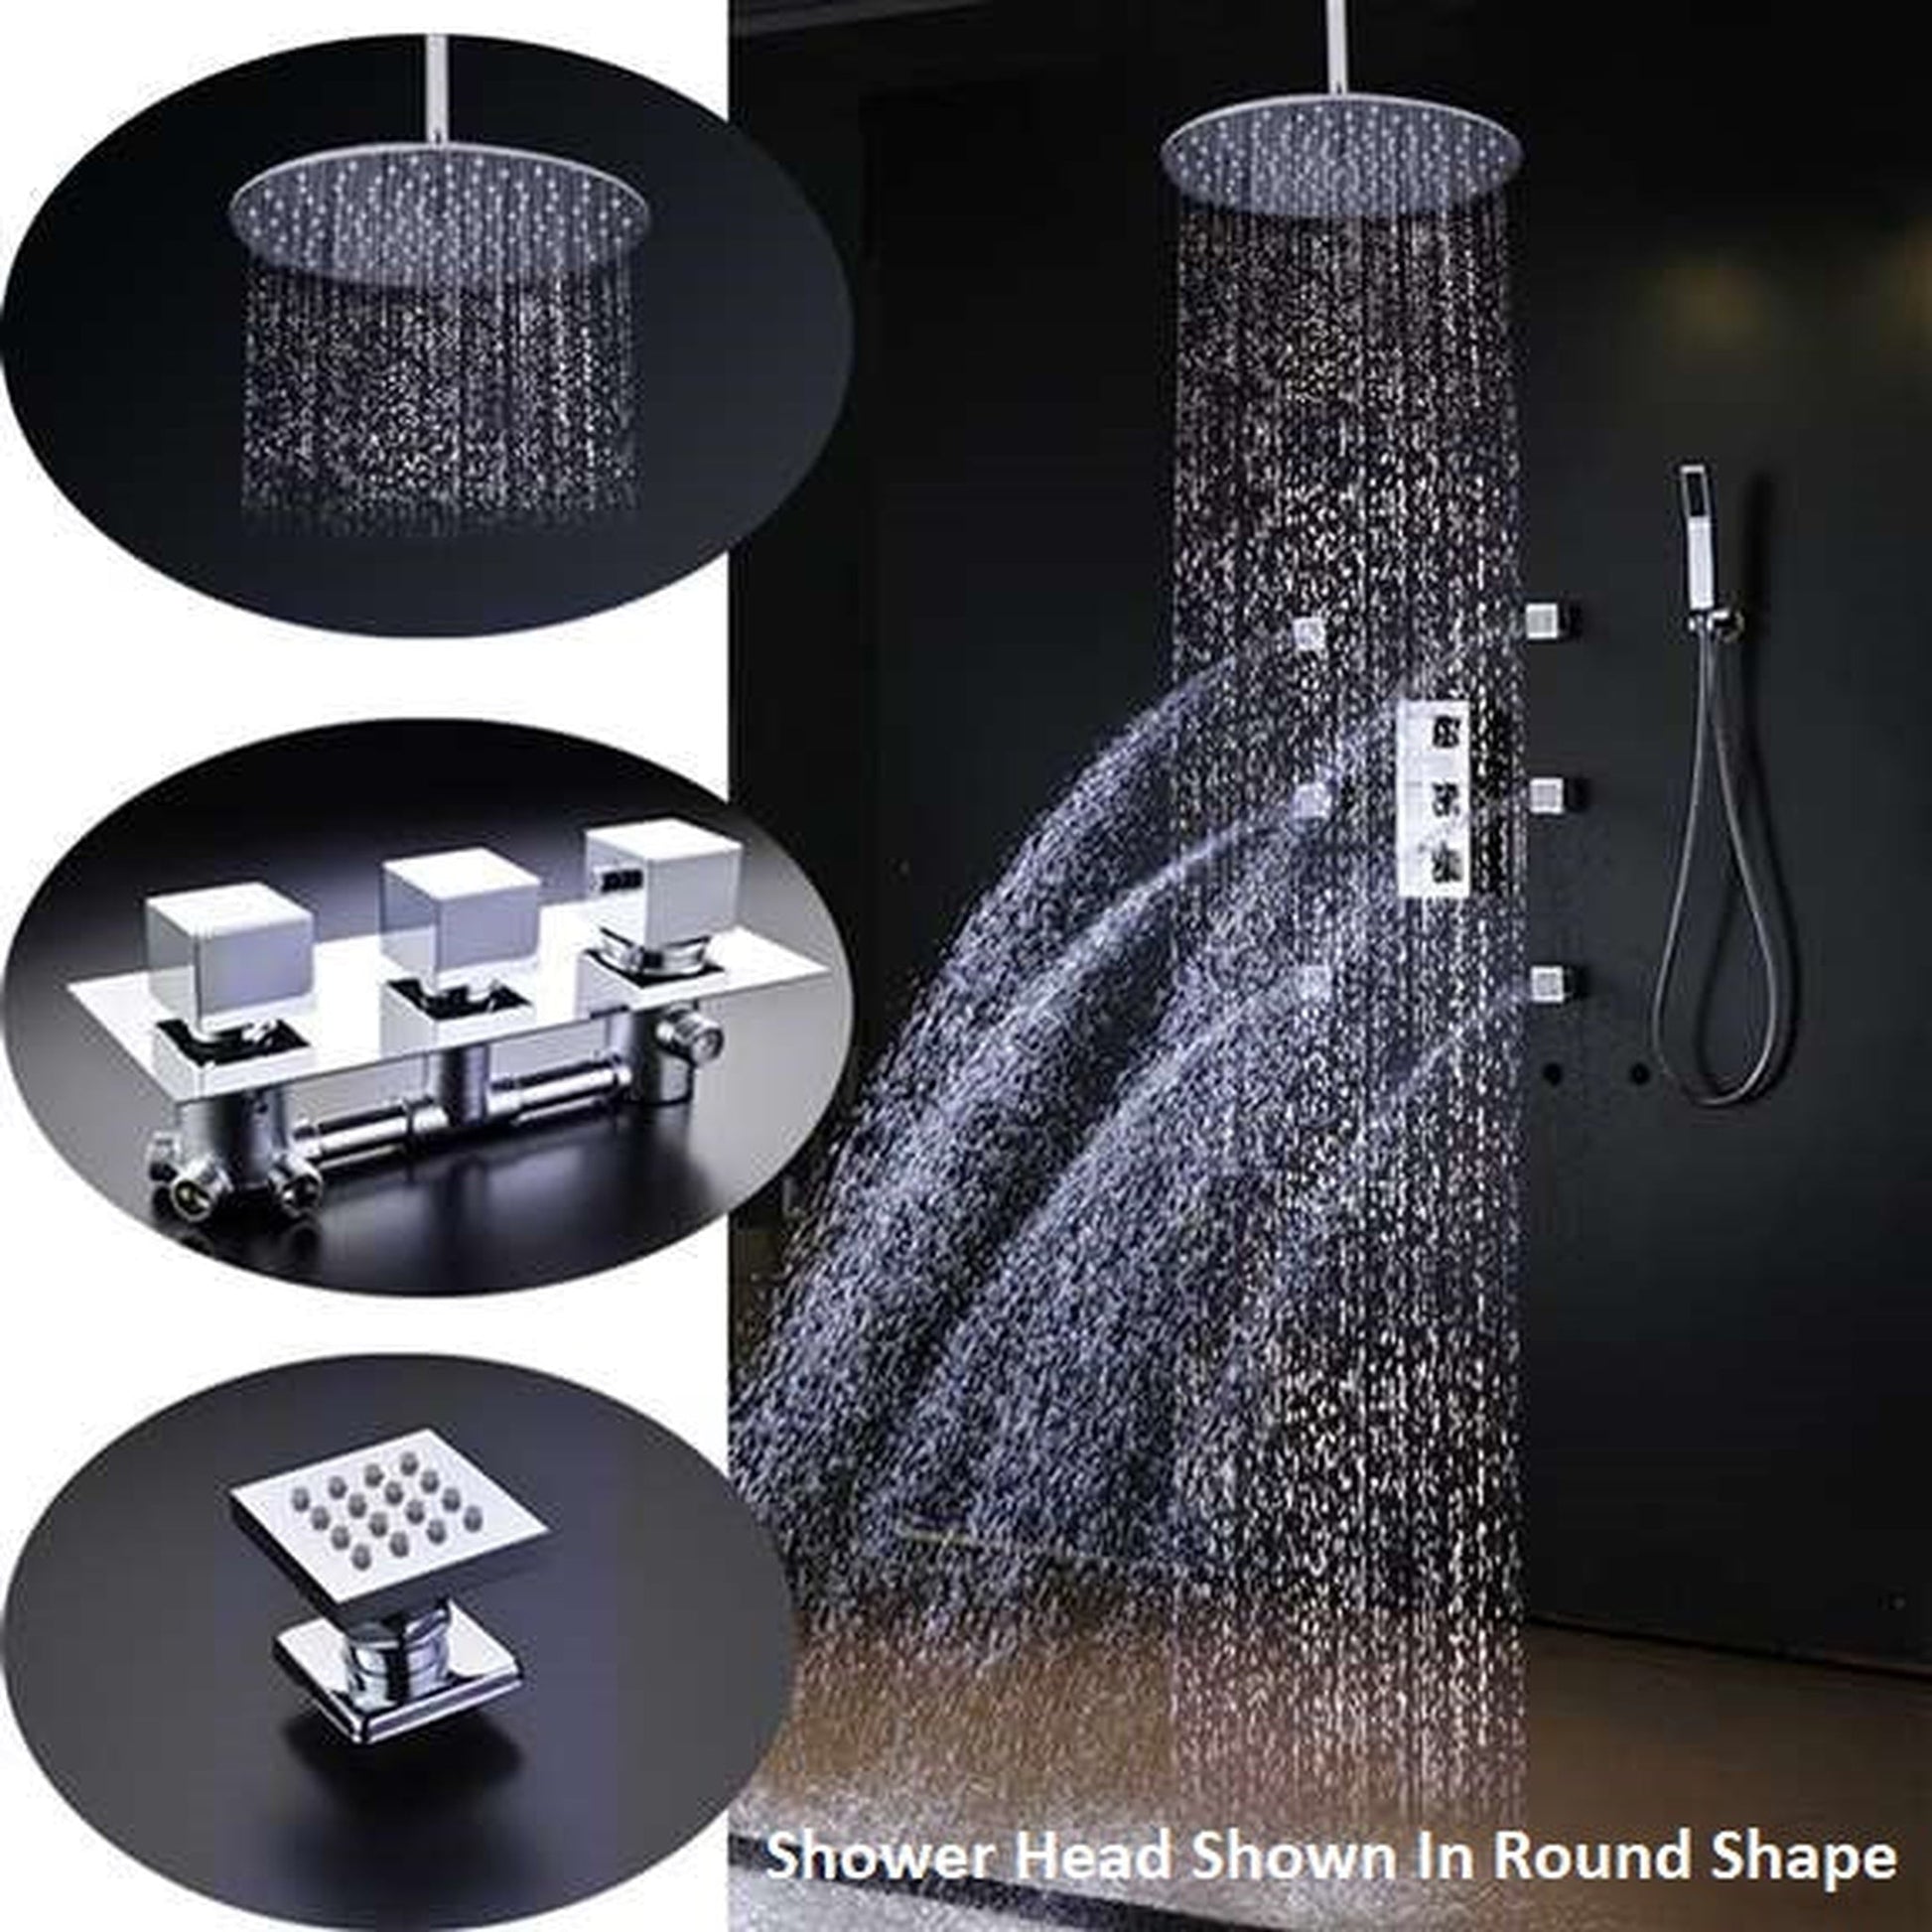 FontanaShowers Atlantic Creative Luxury 12" Large Chrome Square Ceiling Mounted Massage Shower System Without Water Powered LED Lights, 6-Jet Body Sprays and Hand Shower